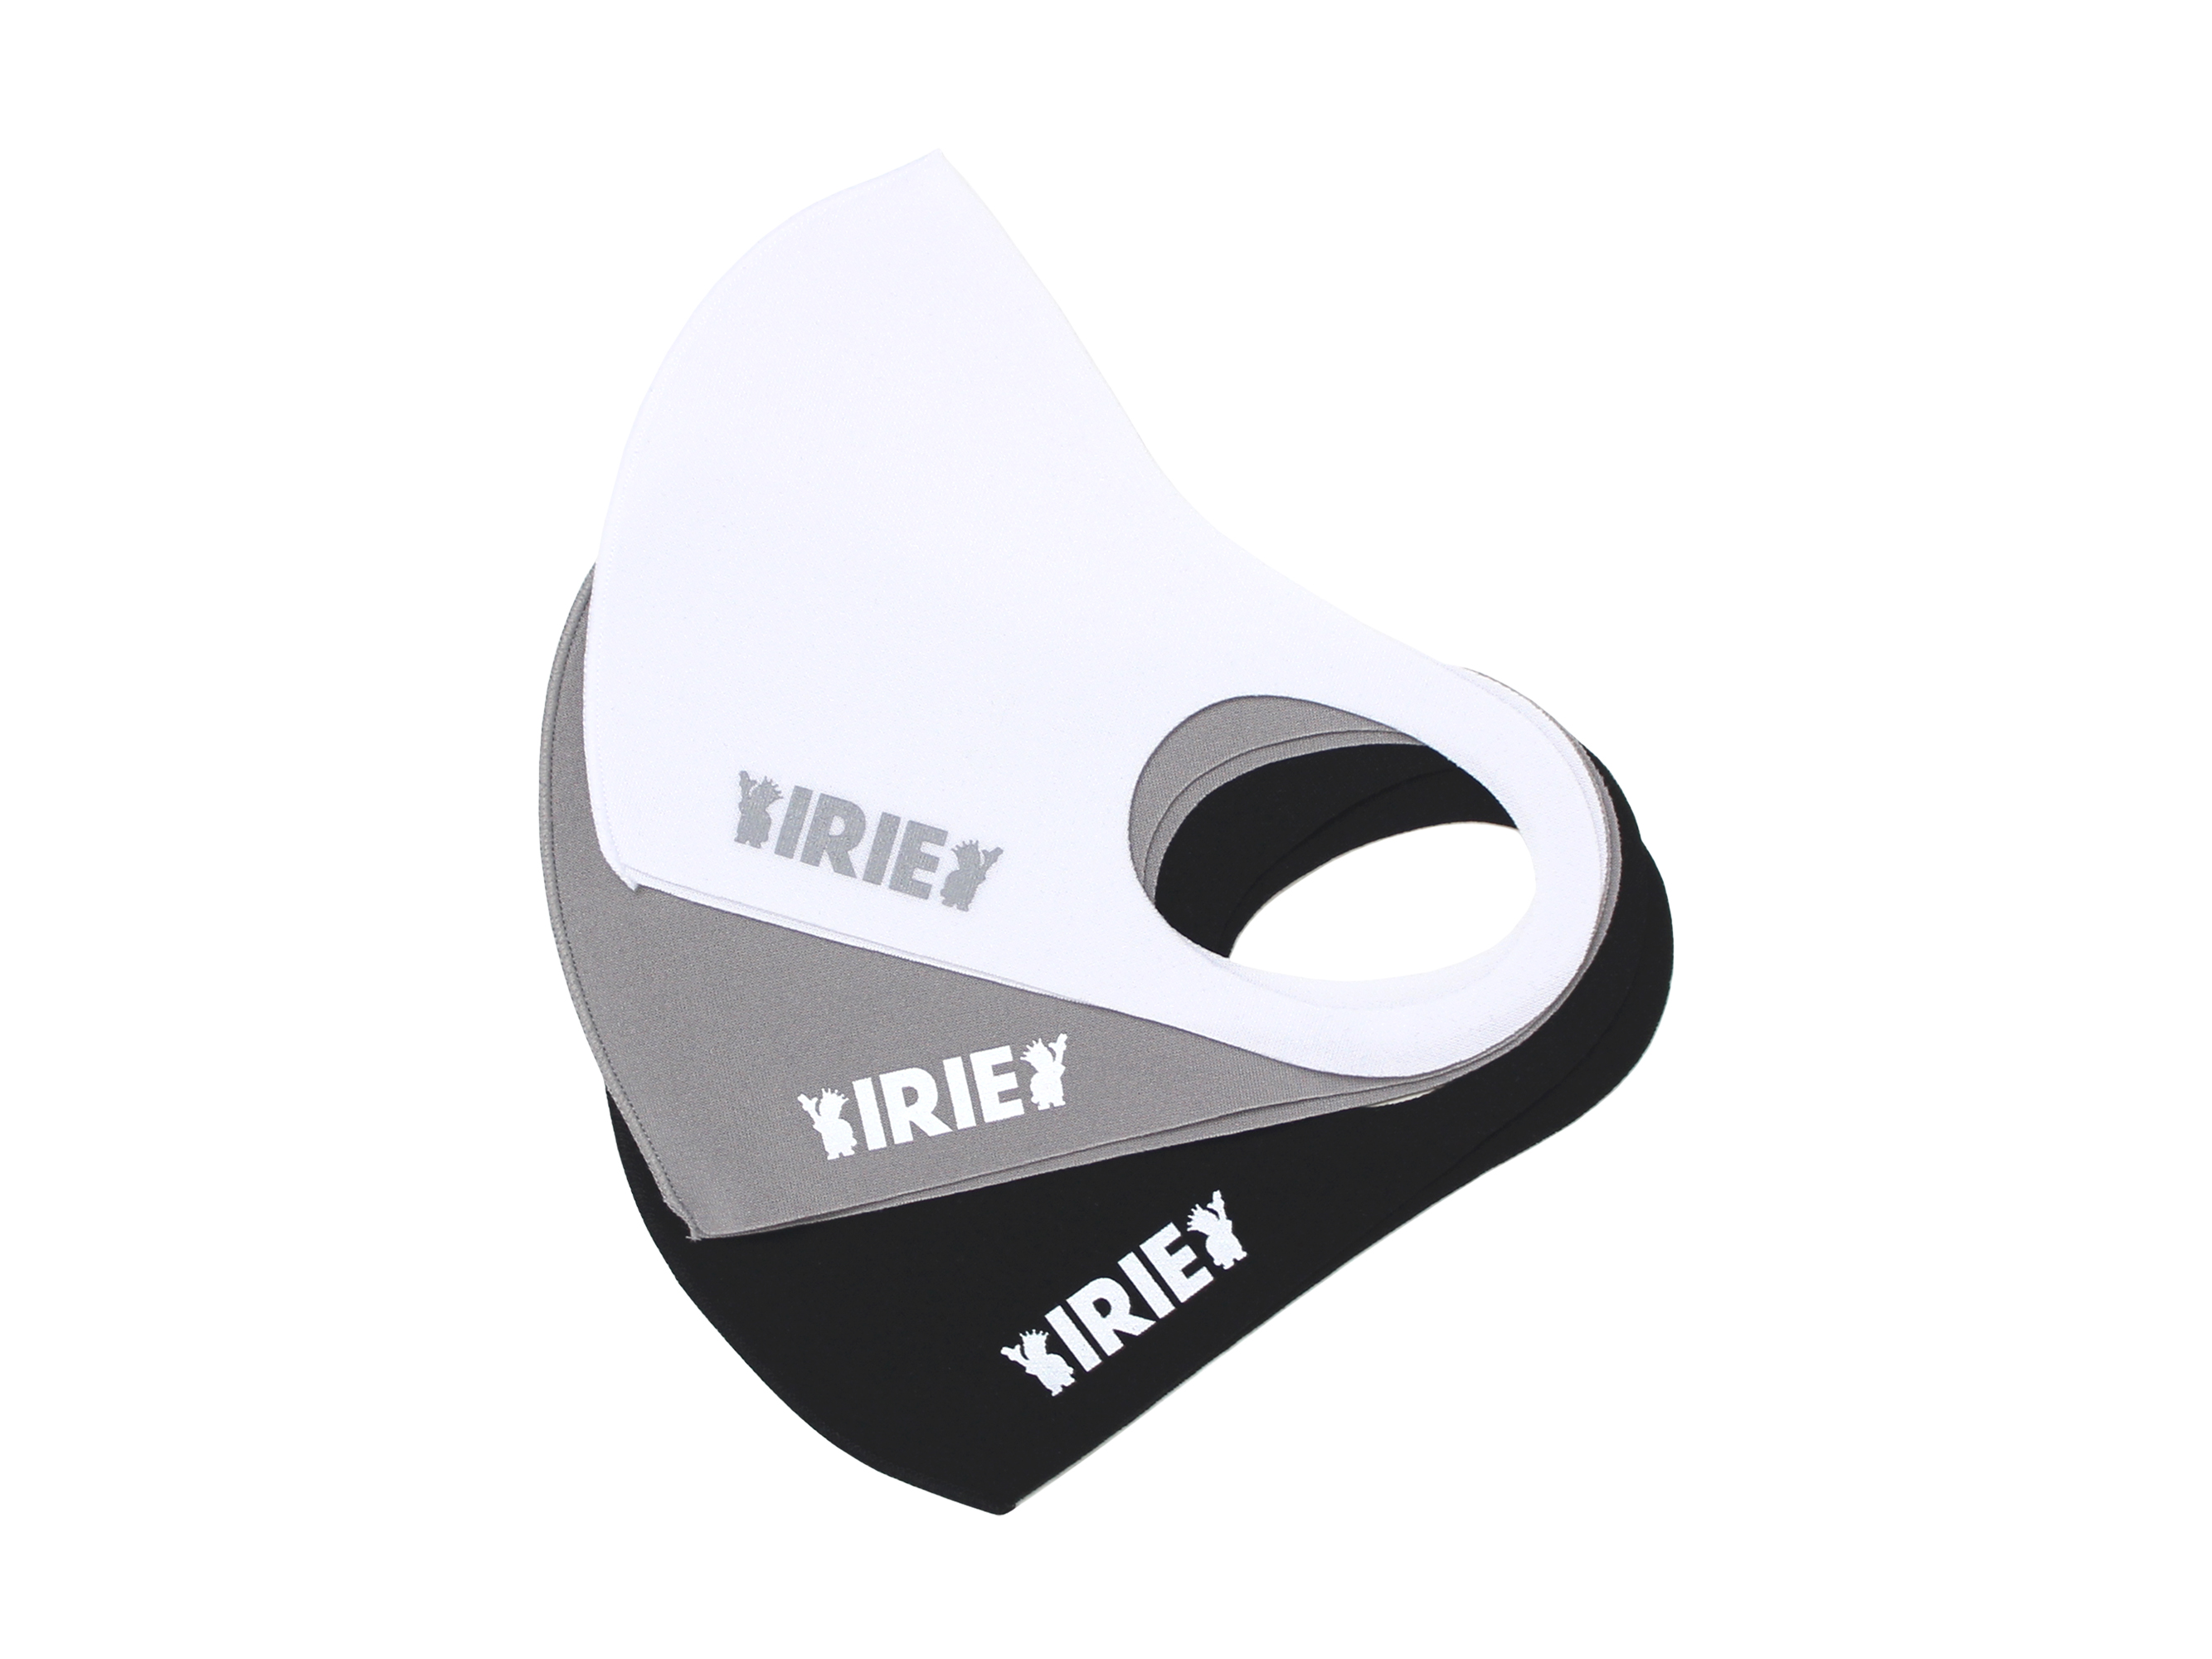 IRIE FACE MASK ver.02 - IRIE by irielife